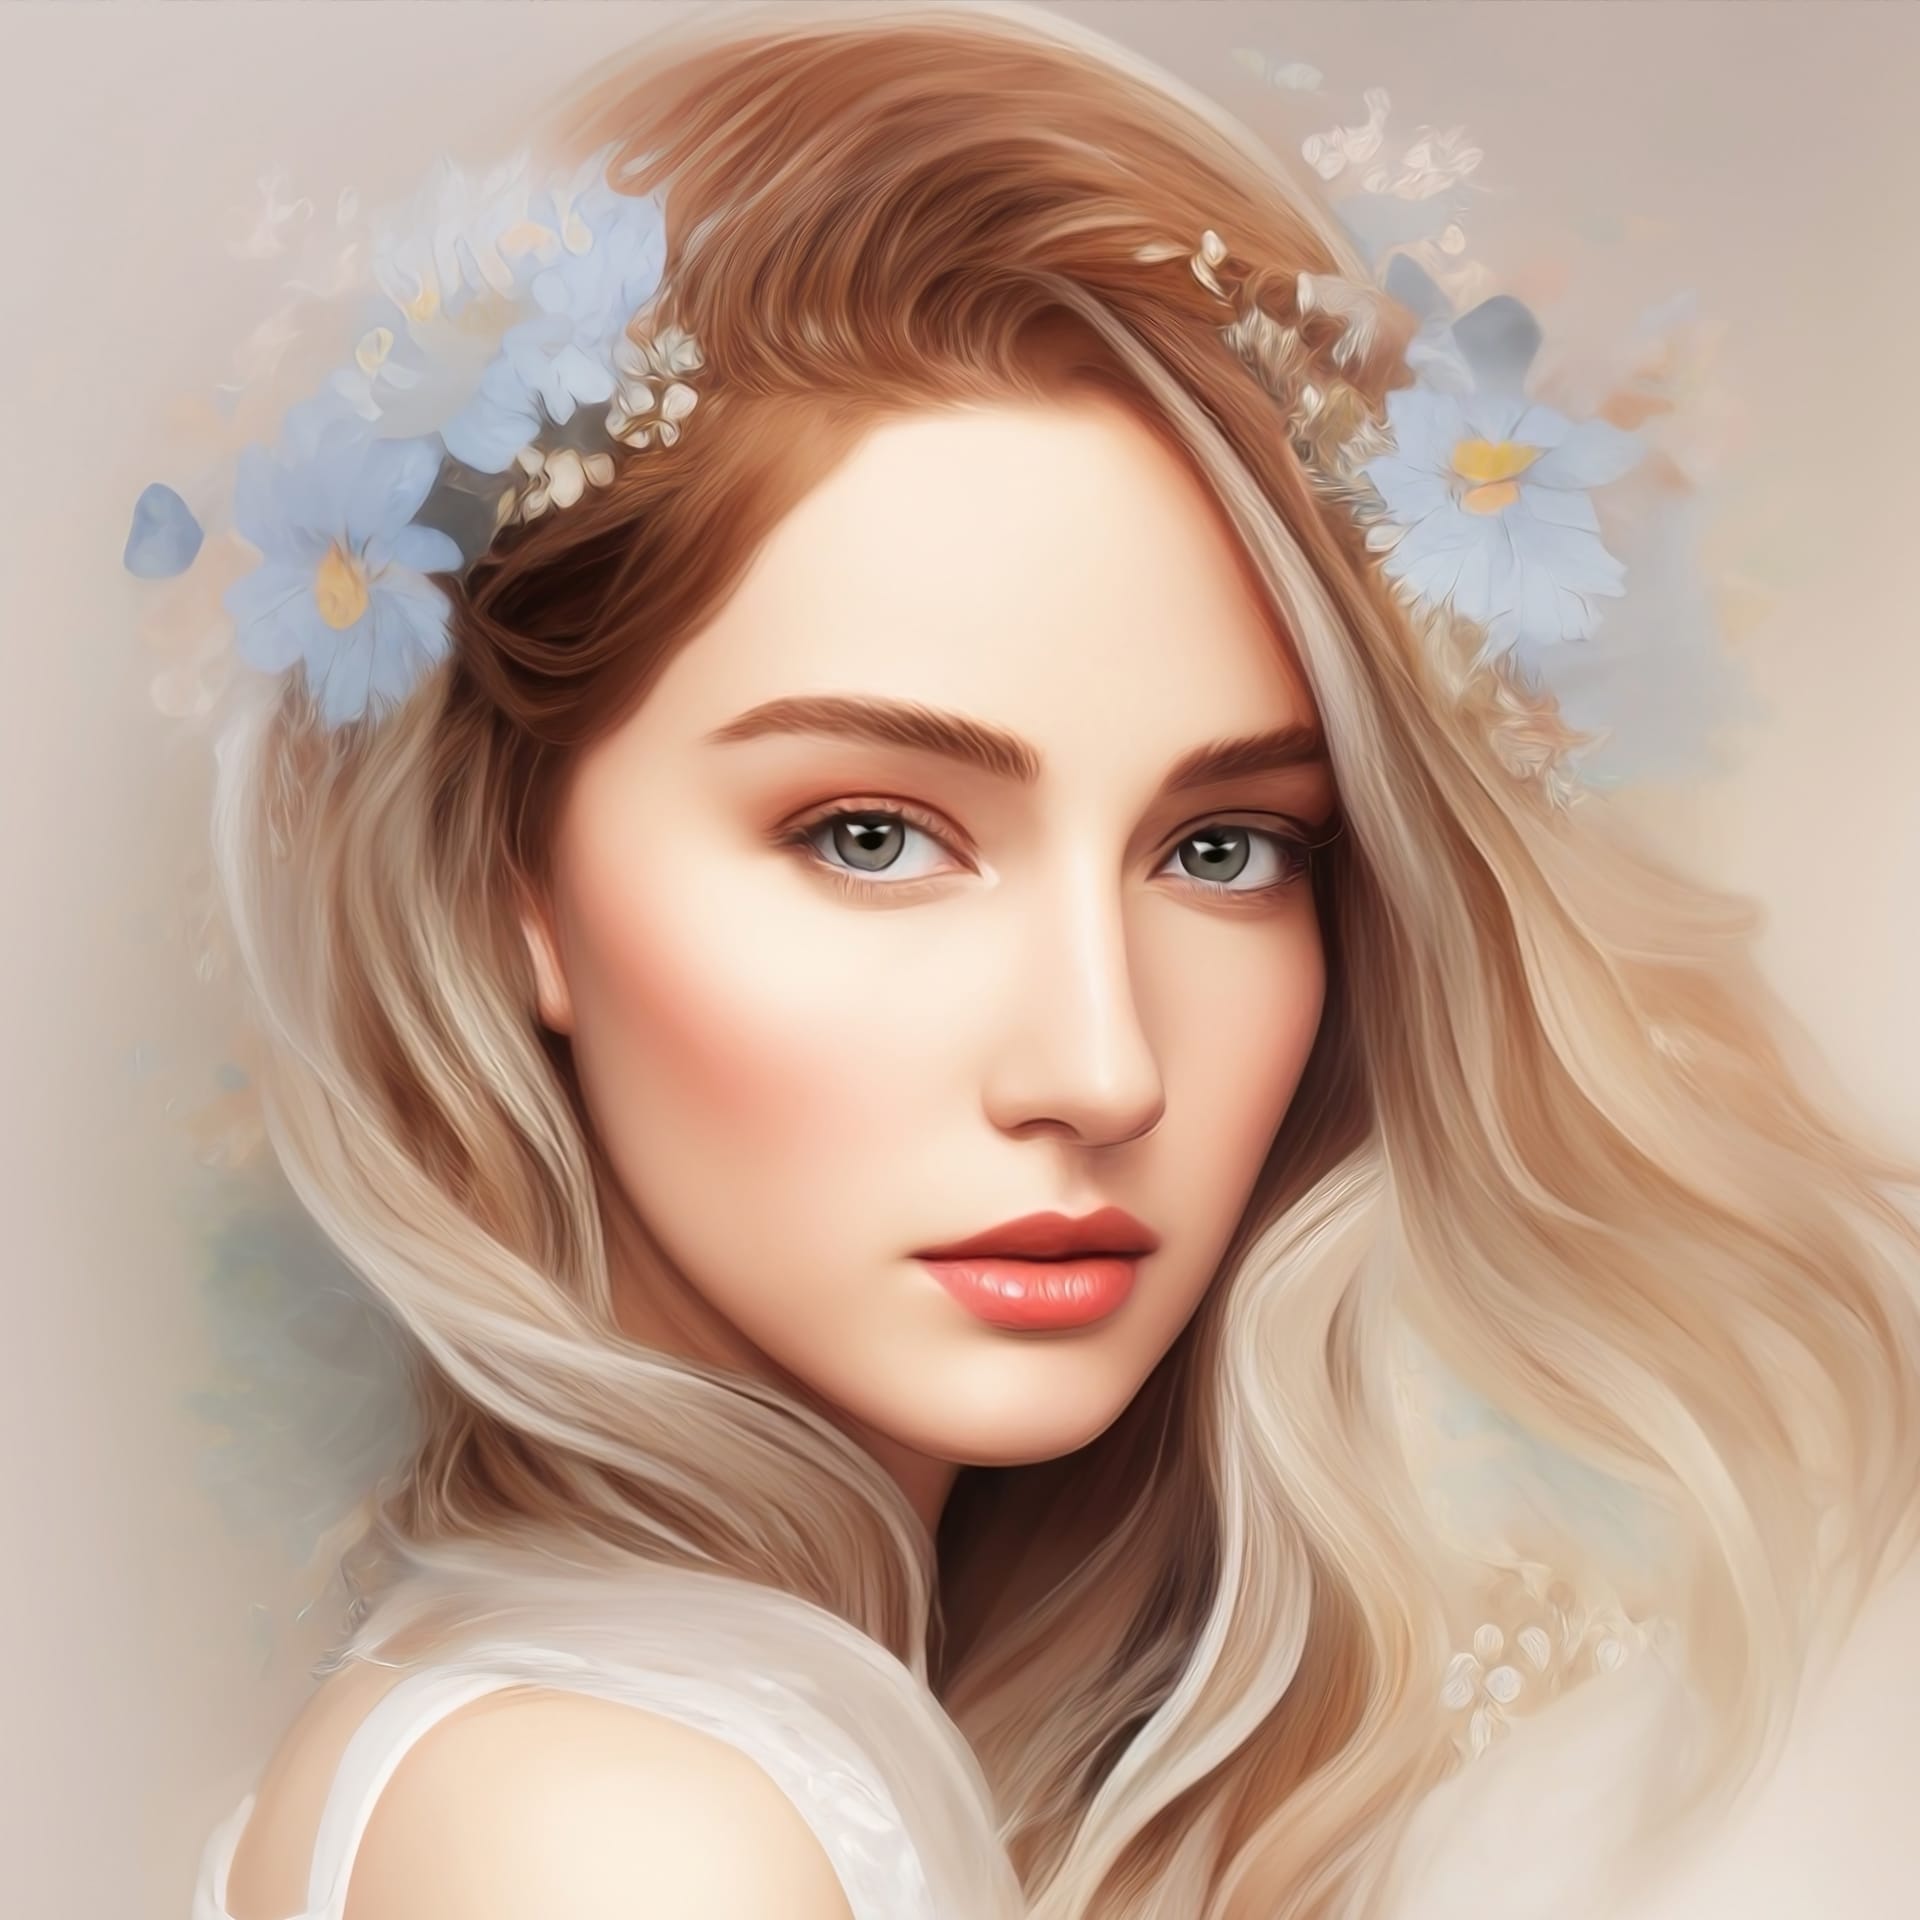 Artistic portrait beautiful woman with blonde hair flowers her head image